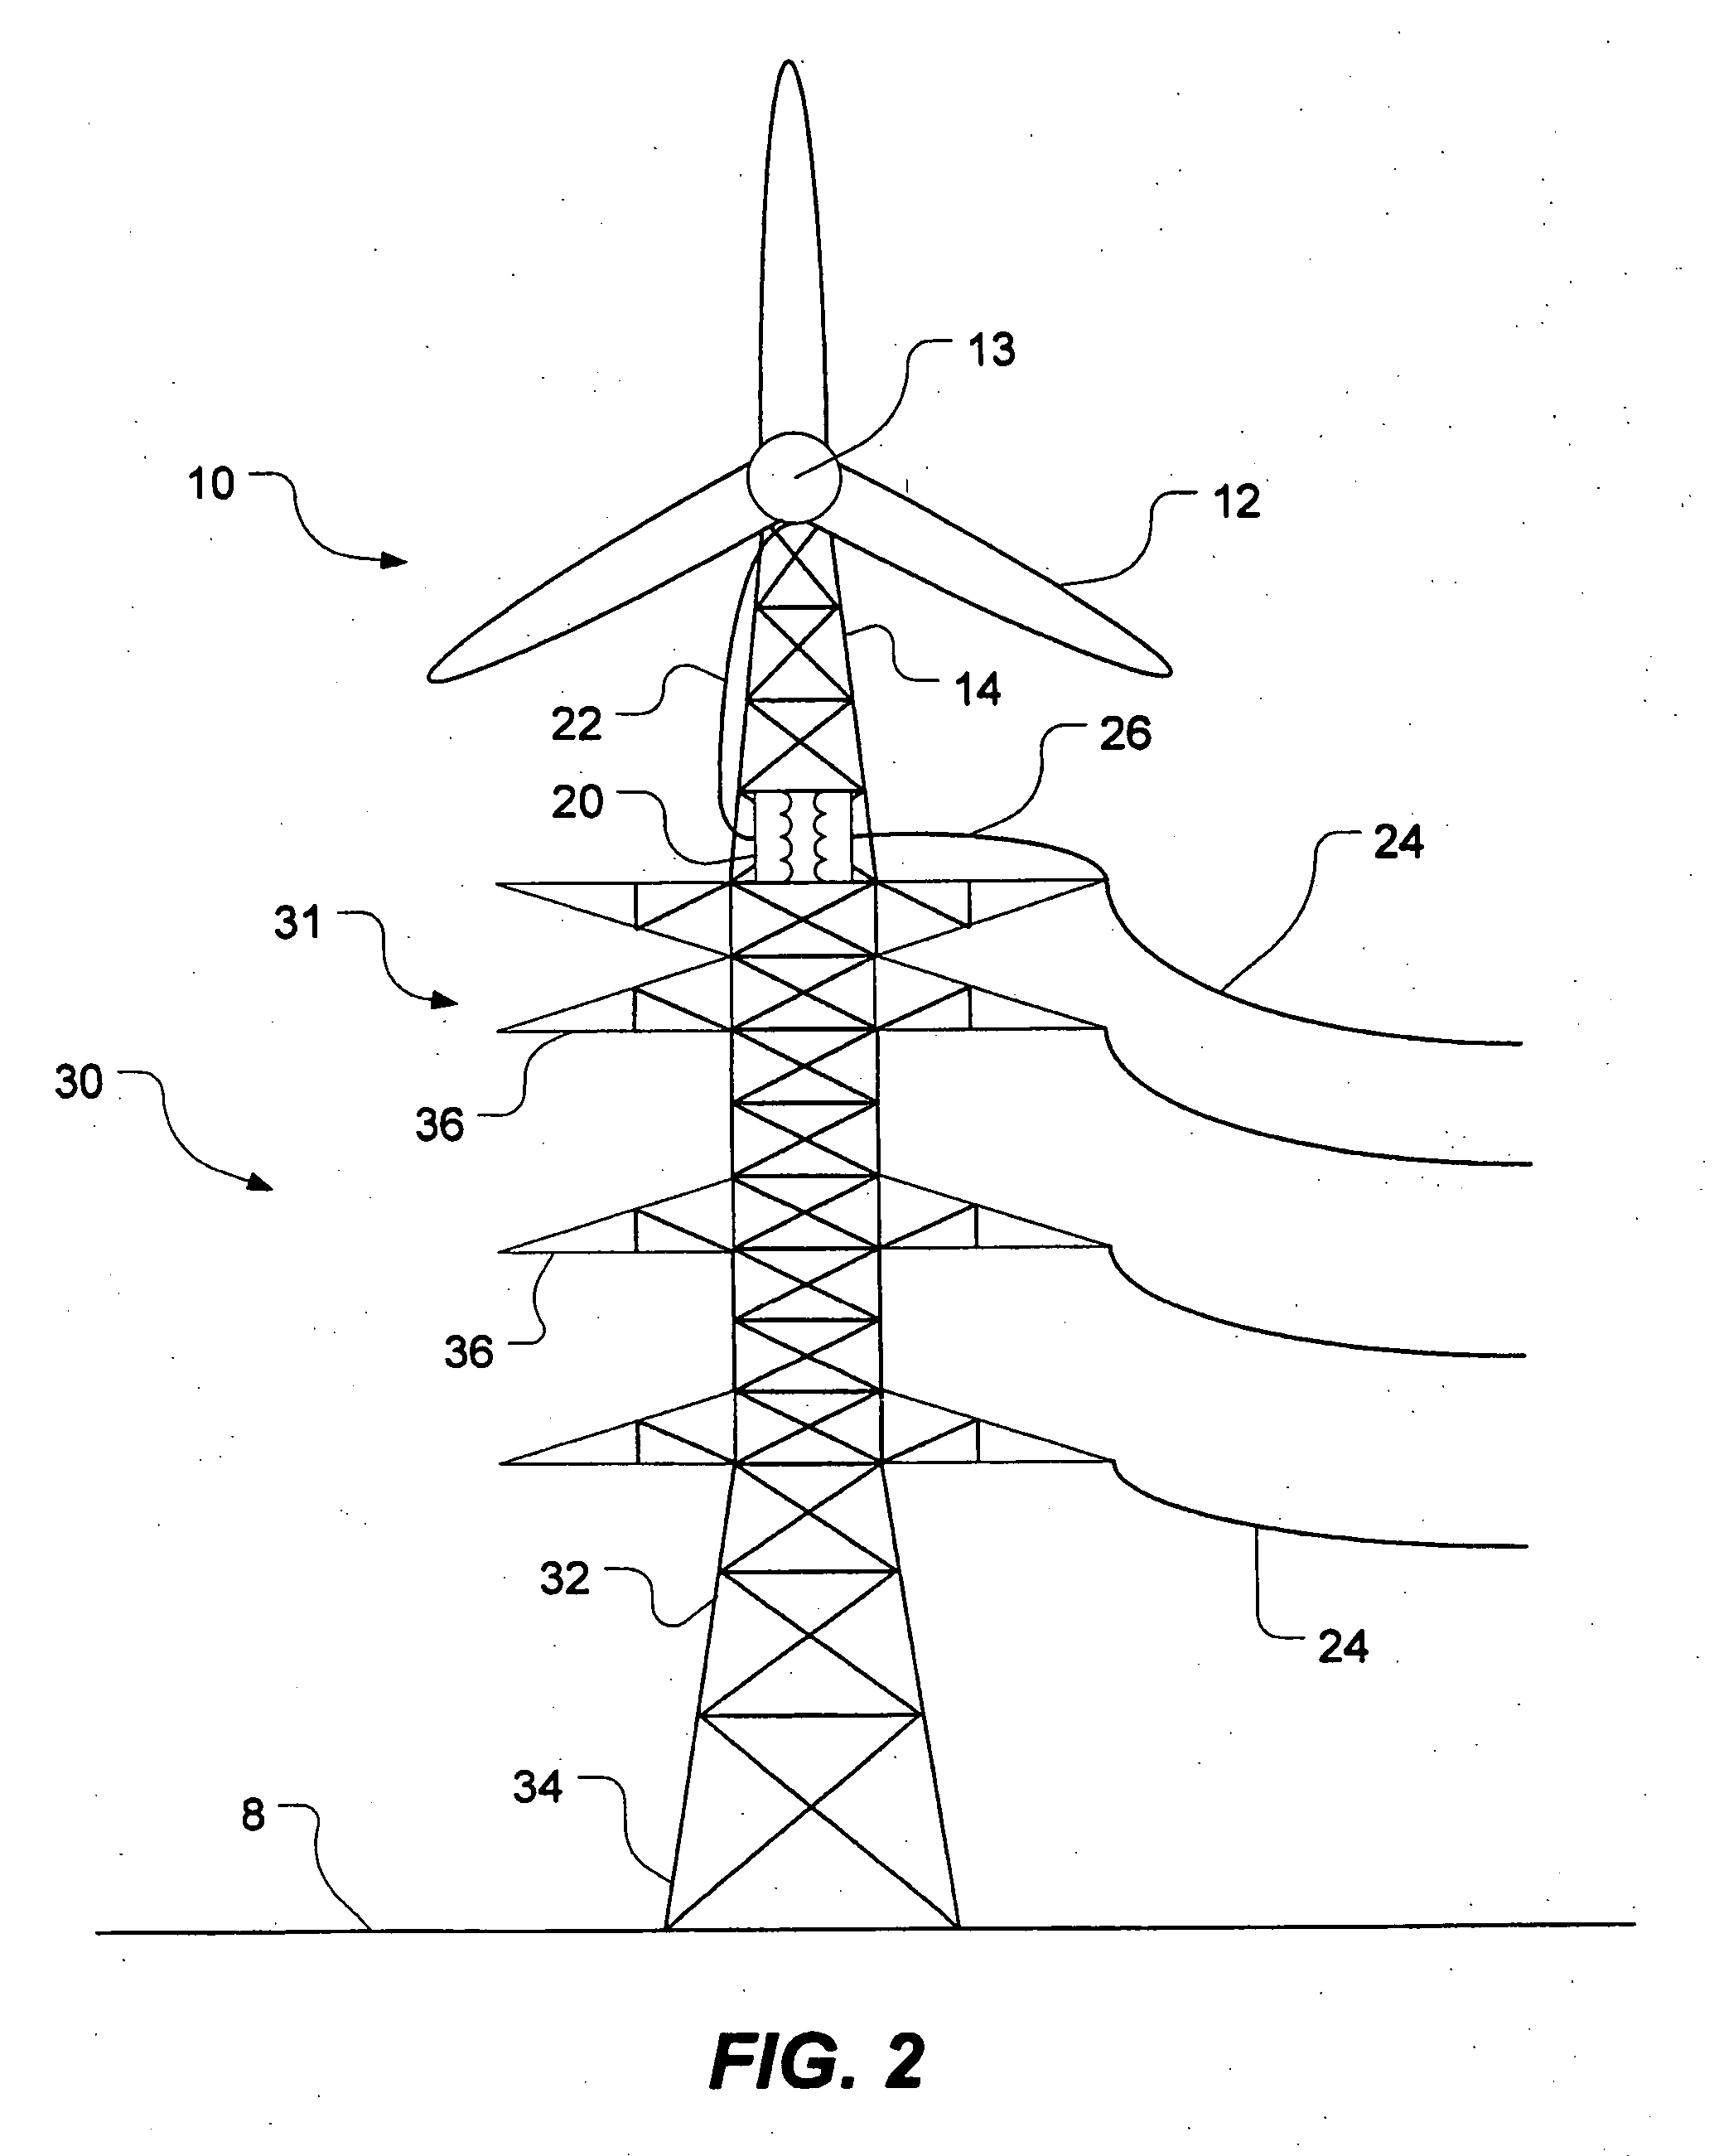 Wind turbine mounted on power transmission tower